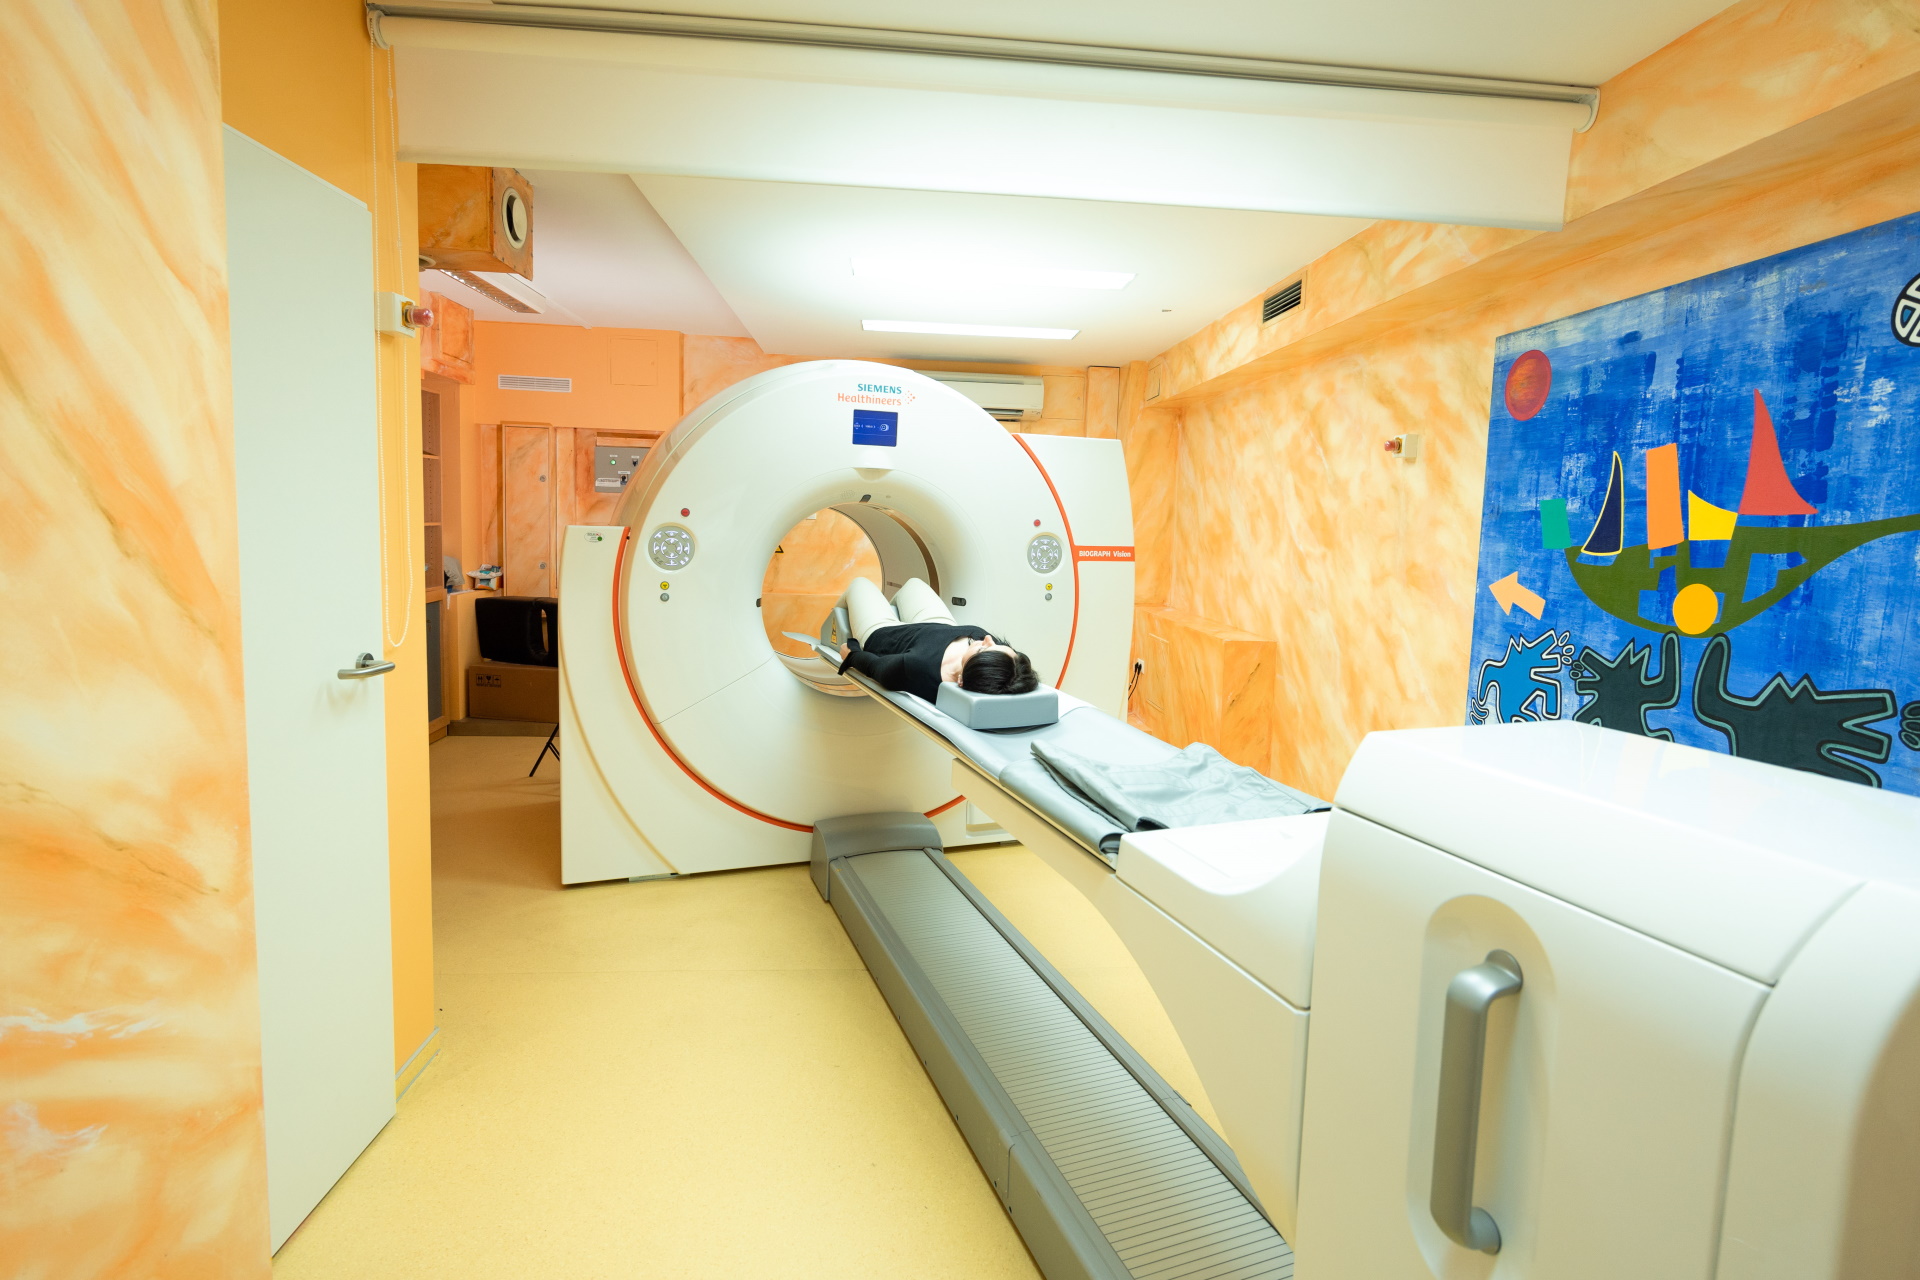 PET/CT in the MCB